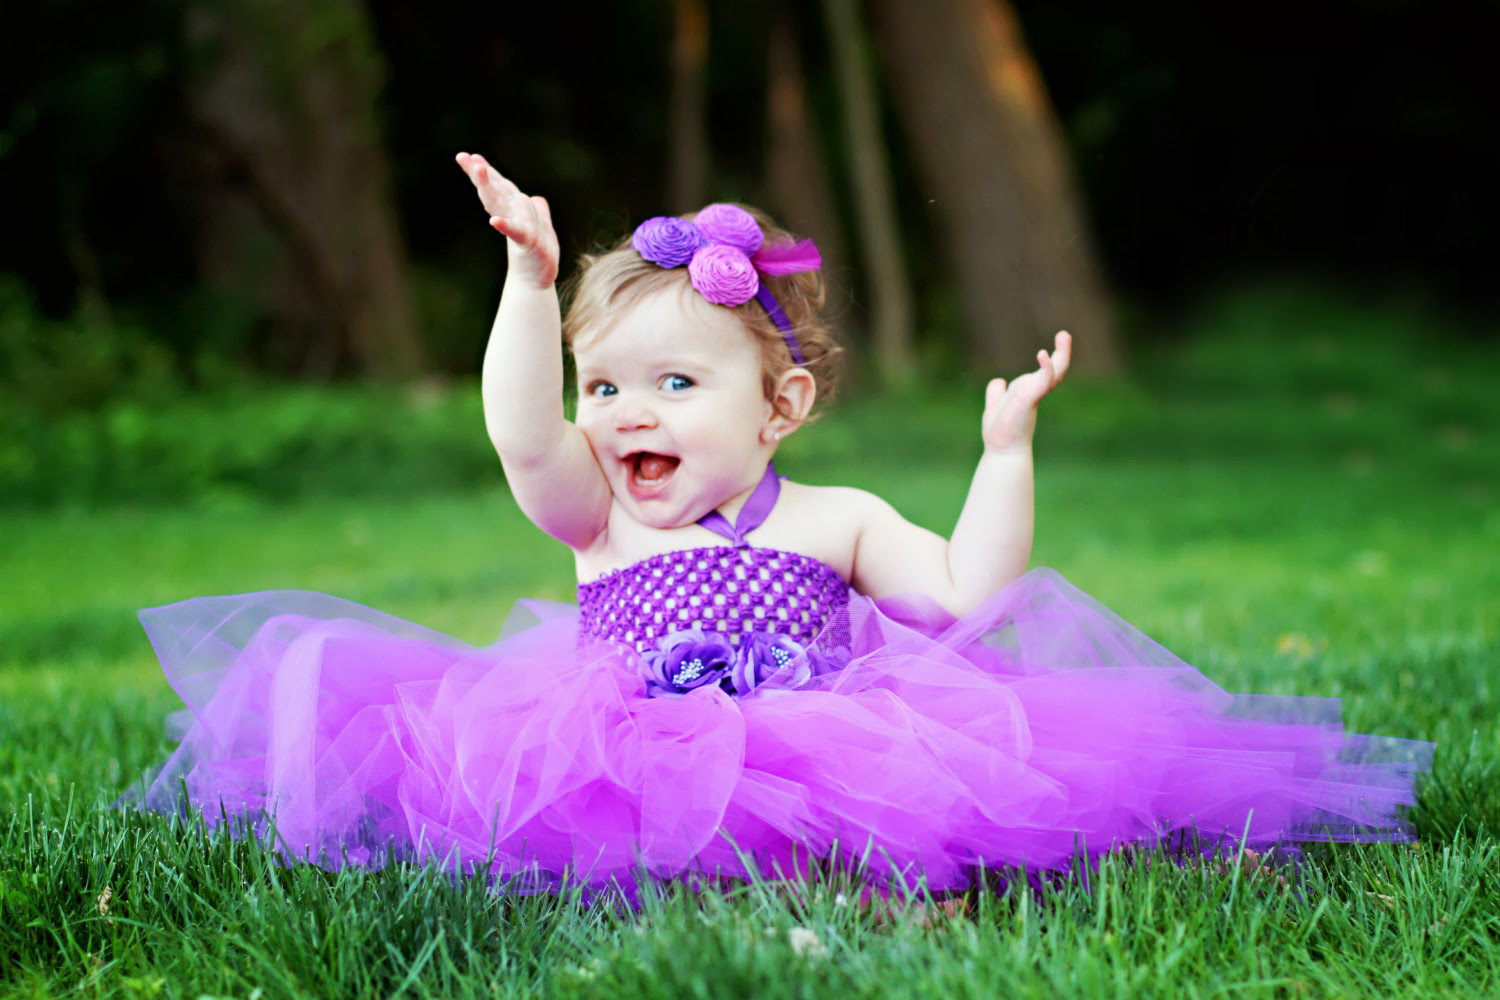 free-download-latest-cute-baby-sweet-baby-hd-wallpaper-in-1080p-super